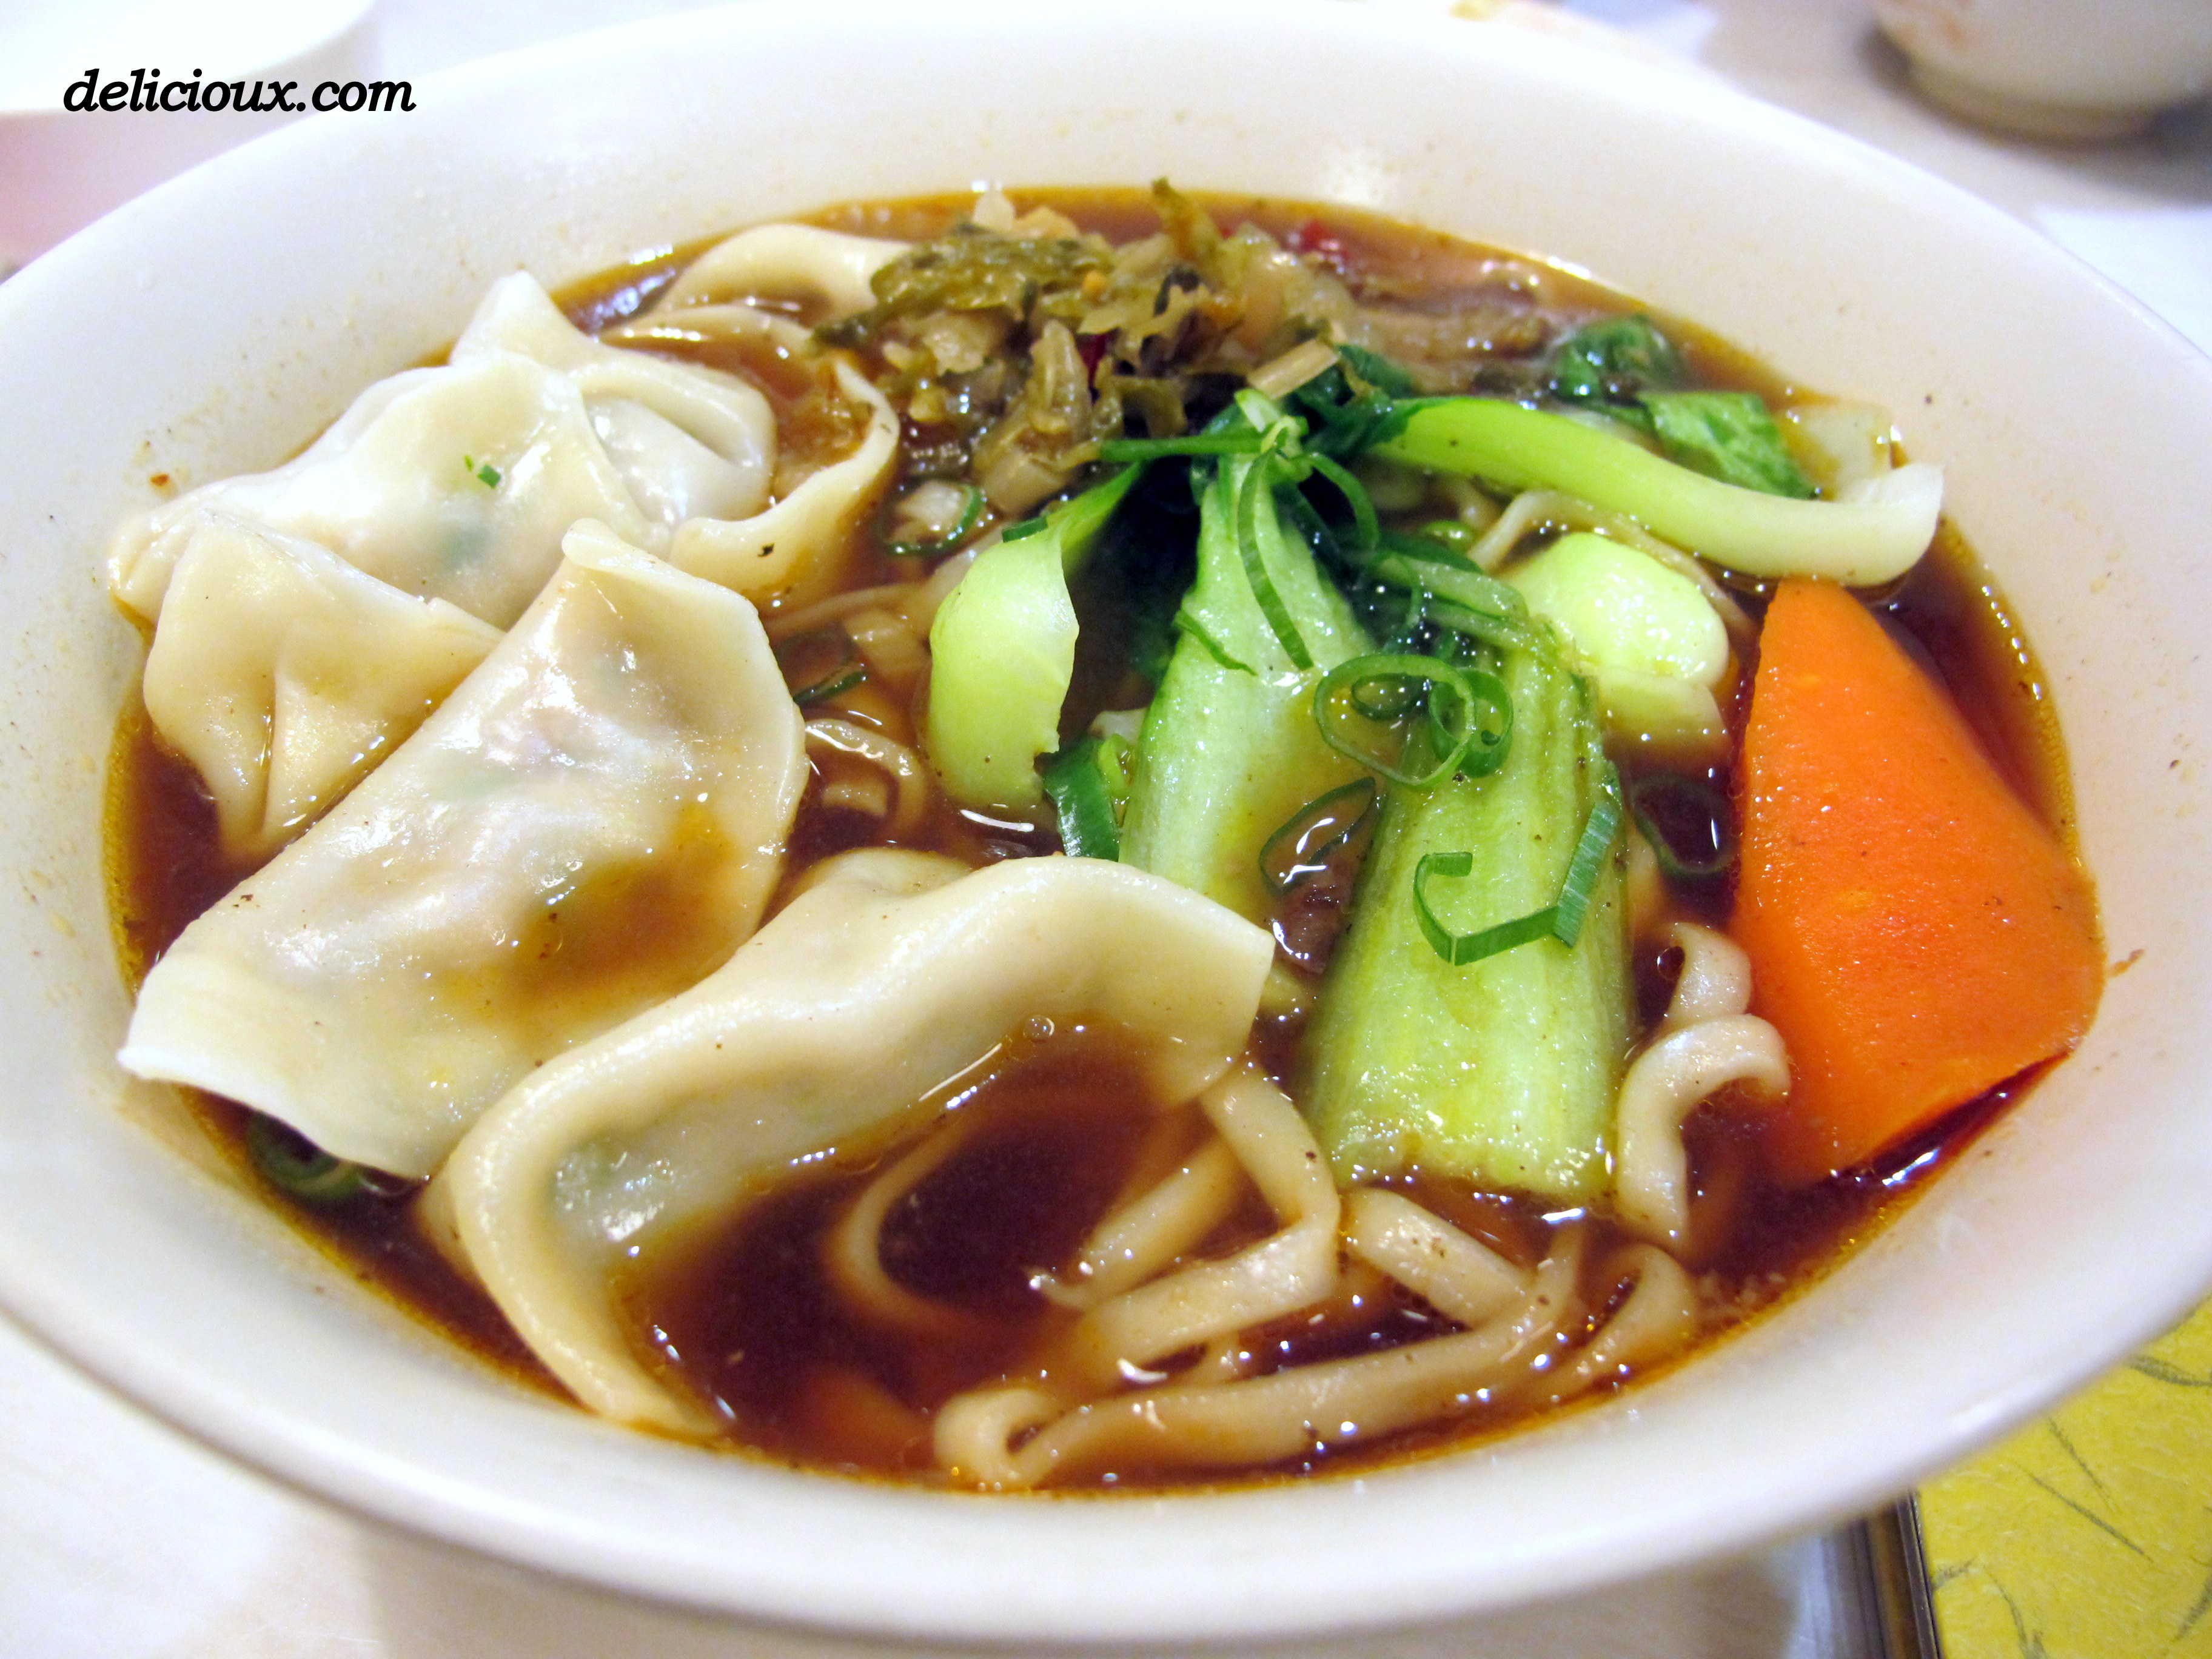 Yang's Cuisine Traditional Taiwanese Food, Sunnybank Hills | delicioux